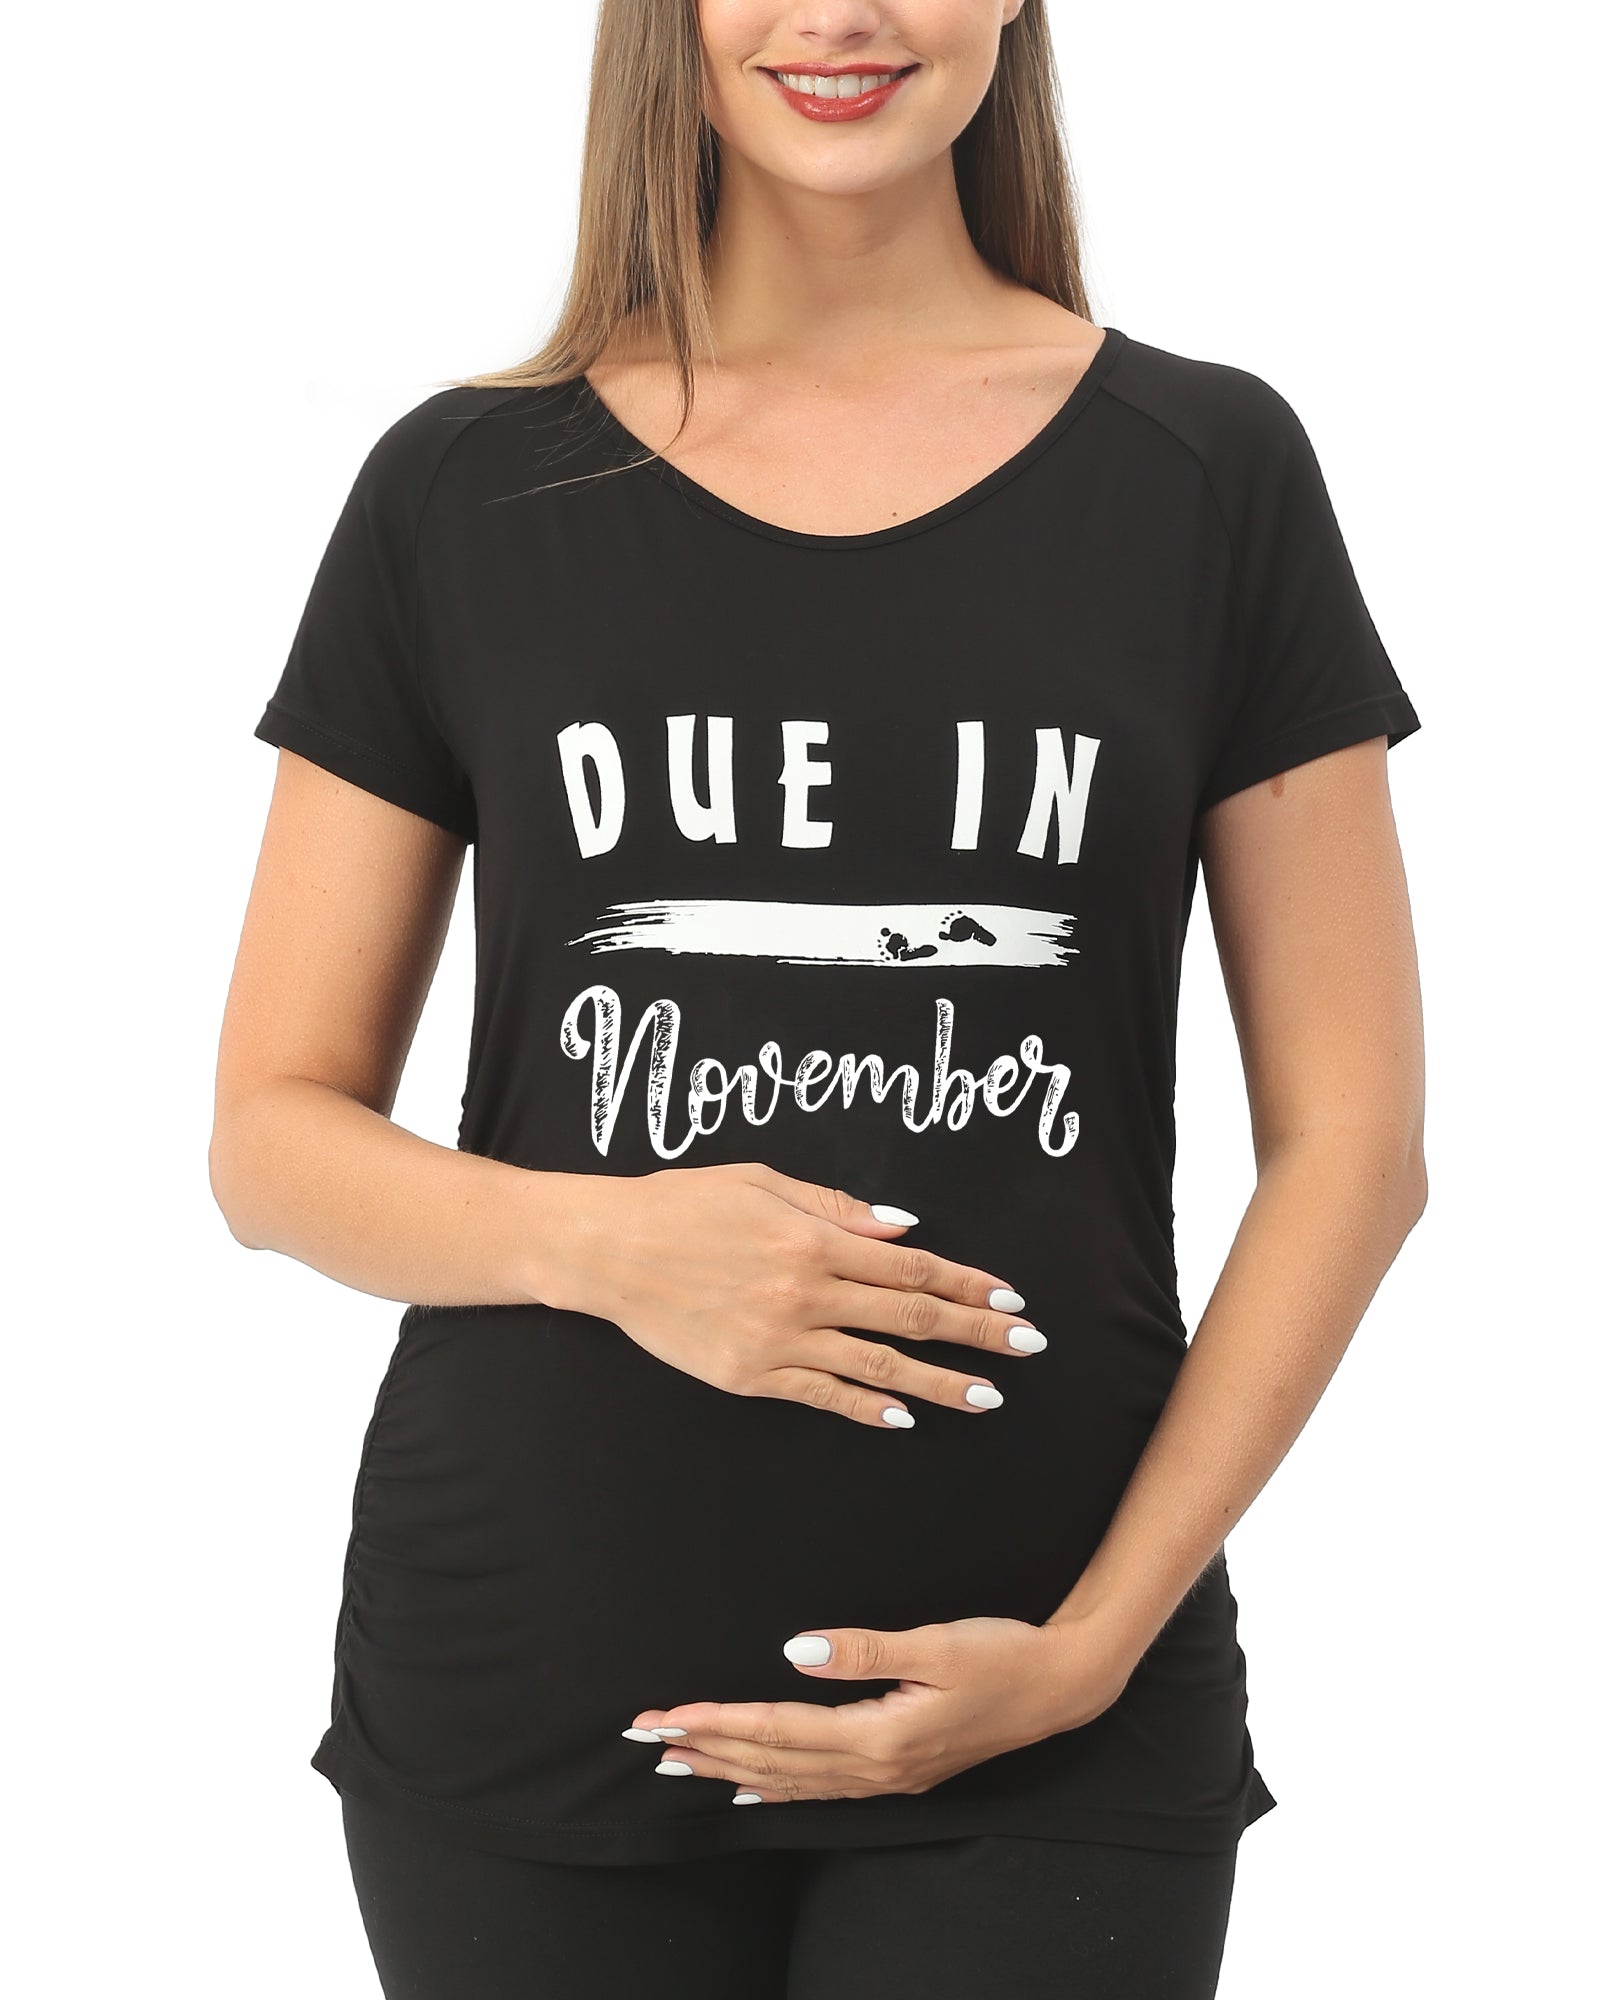 Due in Graphic Maternity Shirts,November